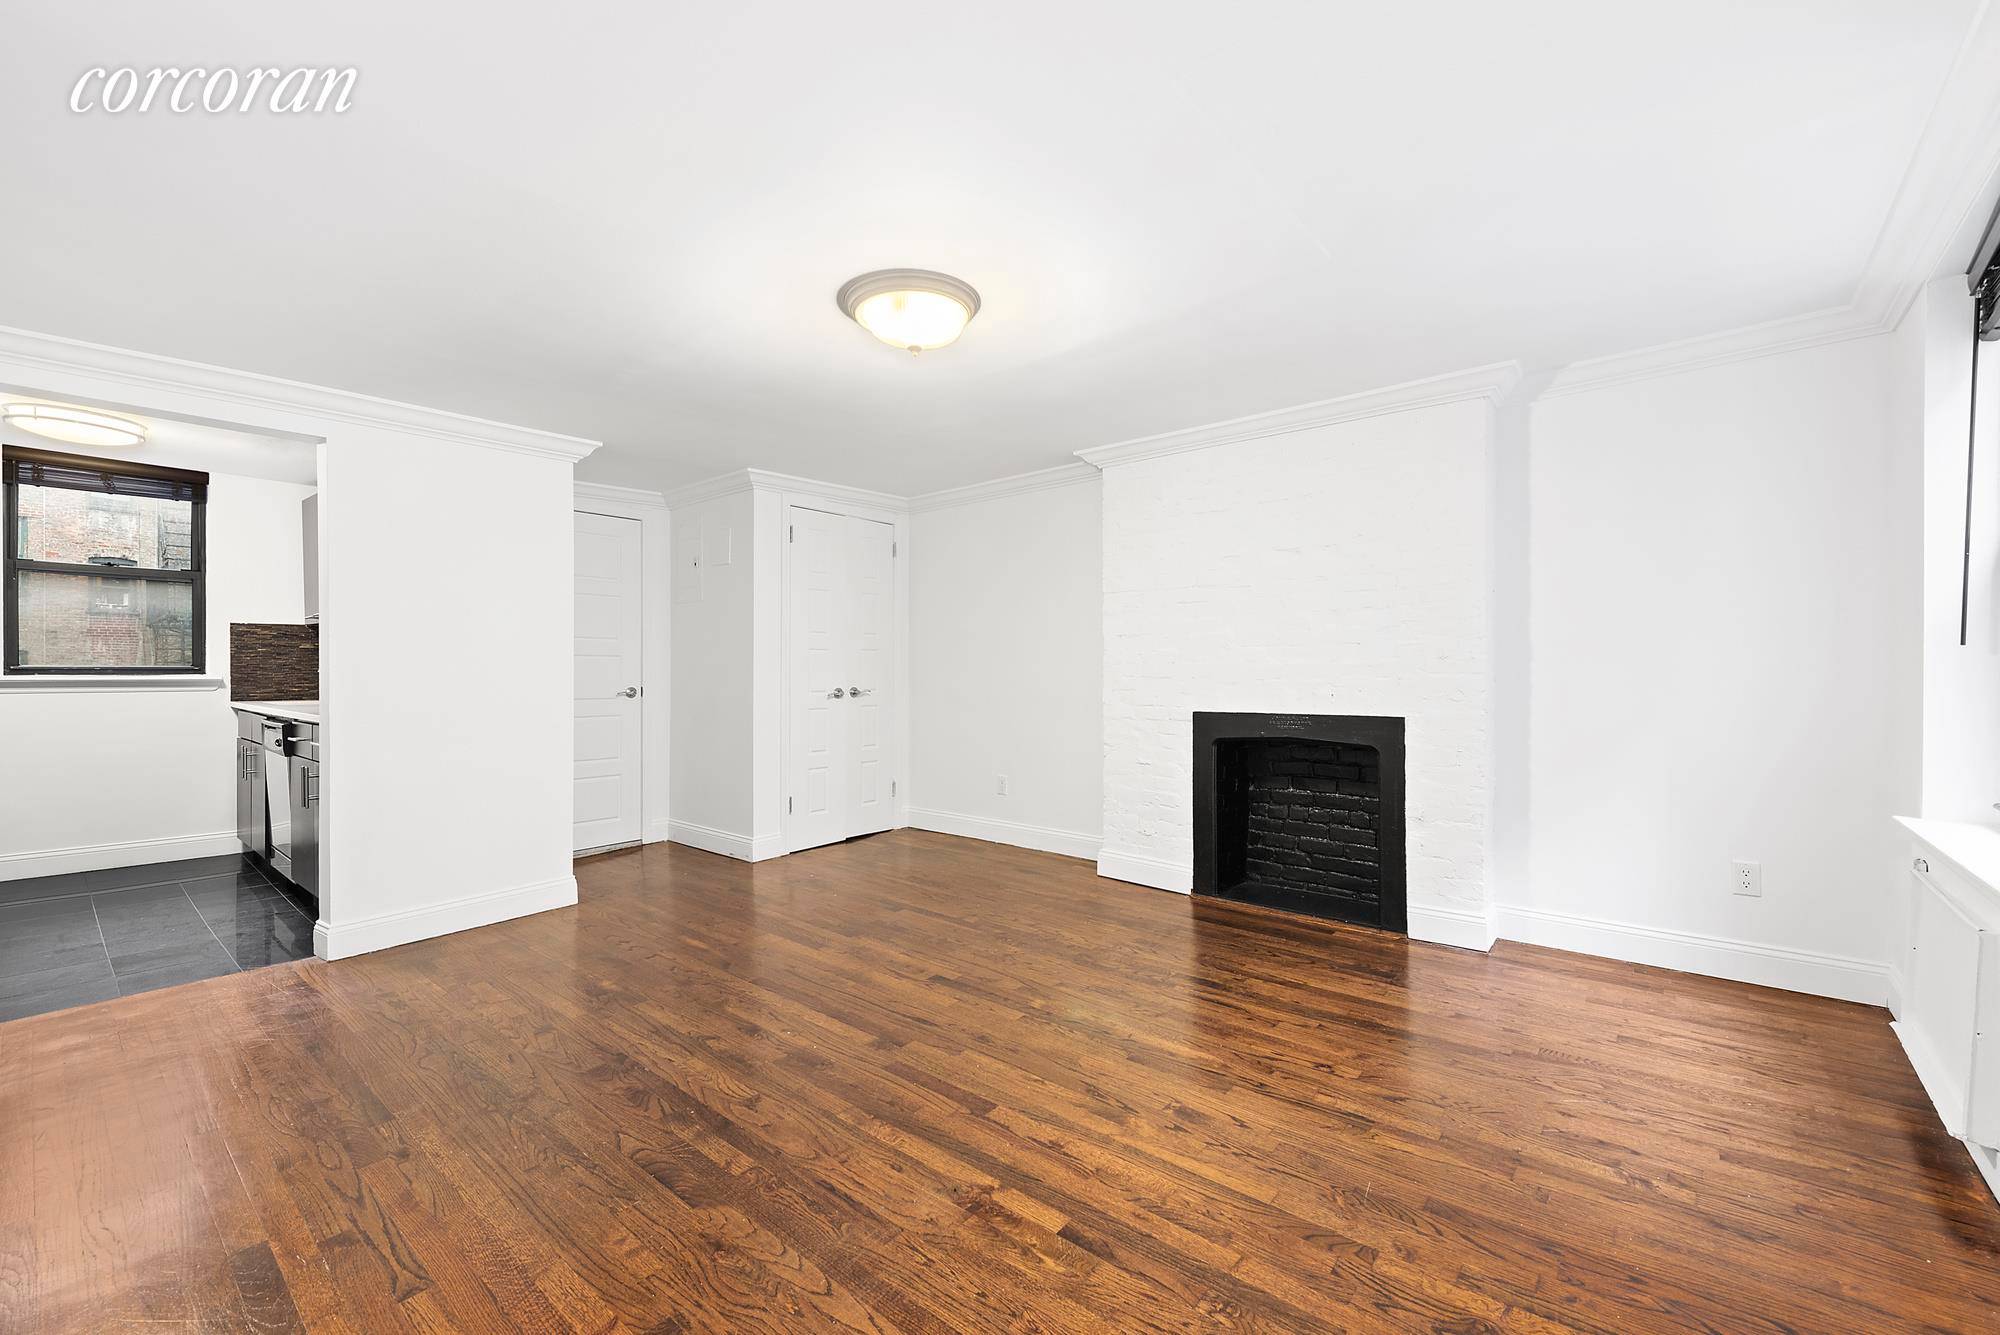 237 East 24th Street, Apartment 3R is a 1 bedroom, 1 bath with a spacious living and dining area, beautiful hardwood floors, brick decorative fireplace, renovated windowed kitchen with stainless ...